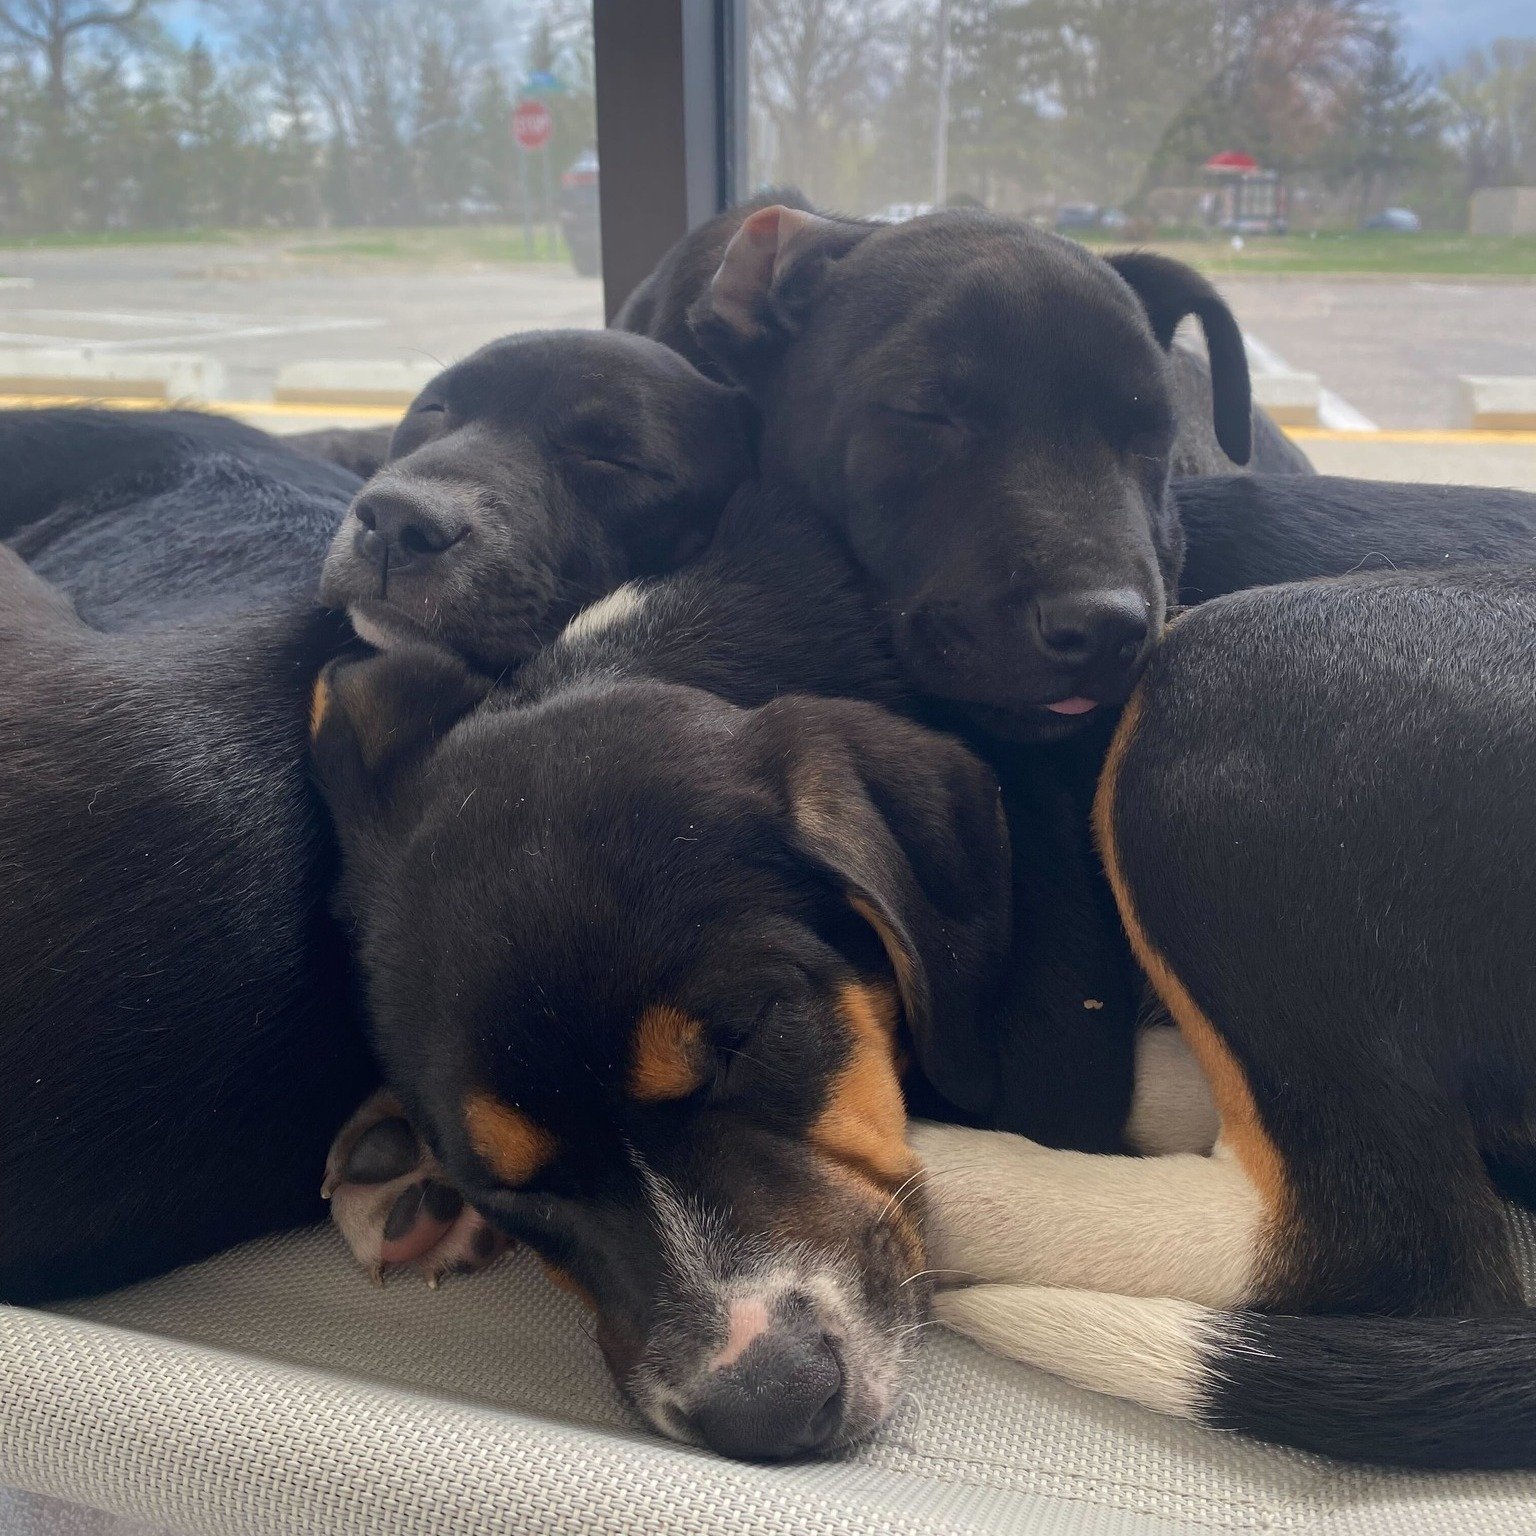 Miley, Olivia, Marvin, and Daffy are hoping today is the day to find their furever homes! They will be waiting to meet you at the CSHS center today from 10 am to 6 pm. 💙🐶

You can learn more about each pup before stopping by at www.carverscotths.or